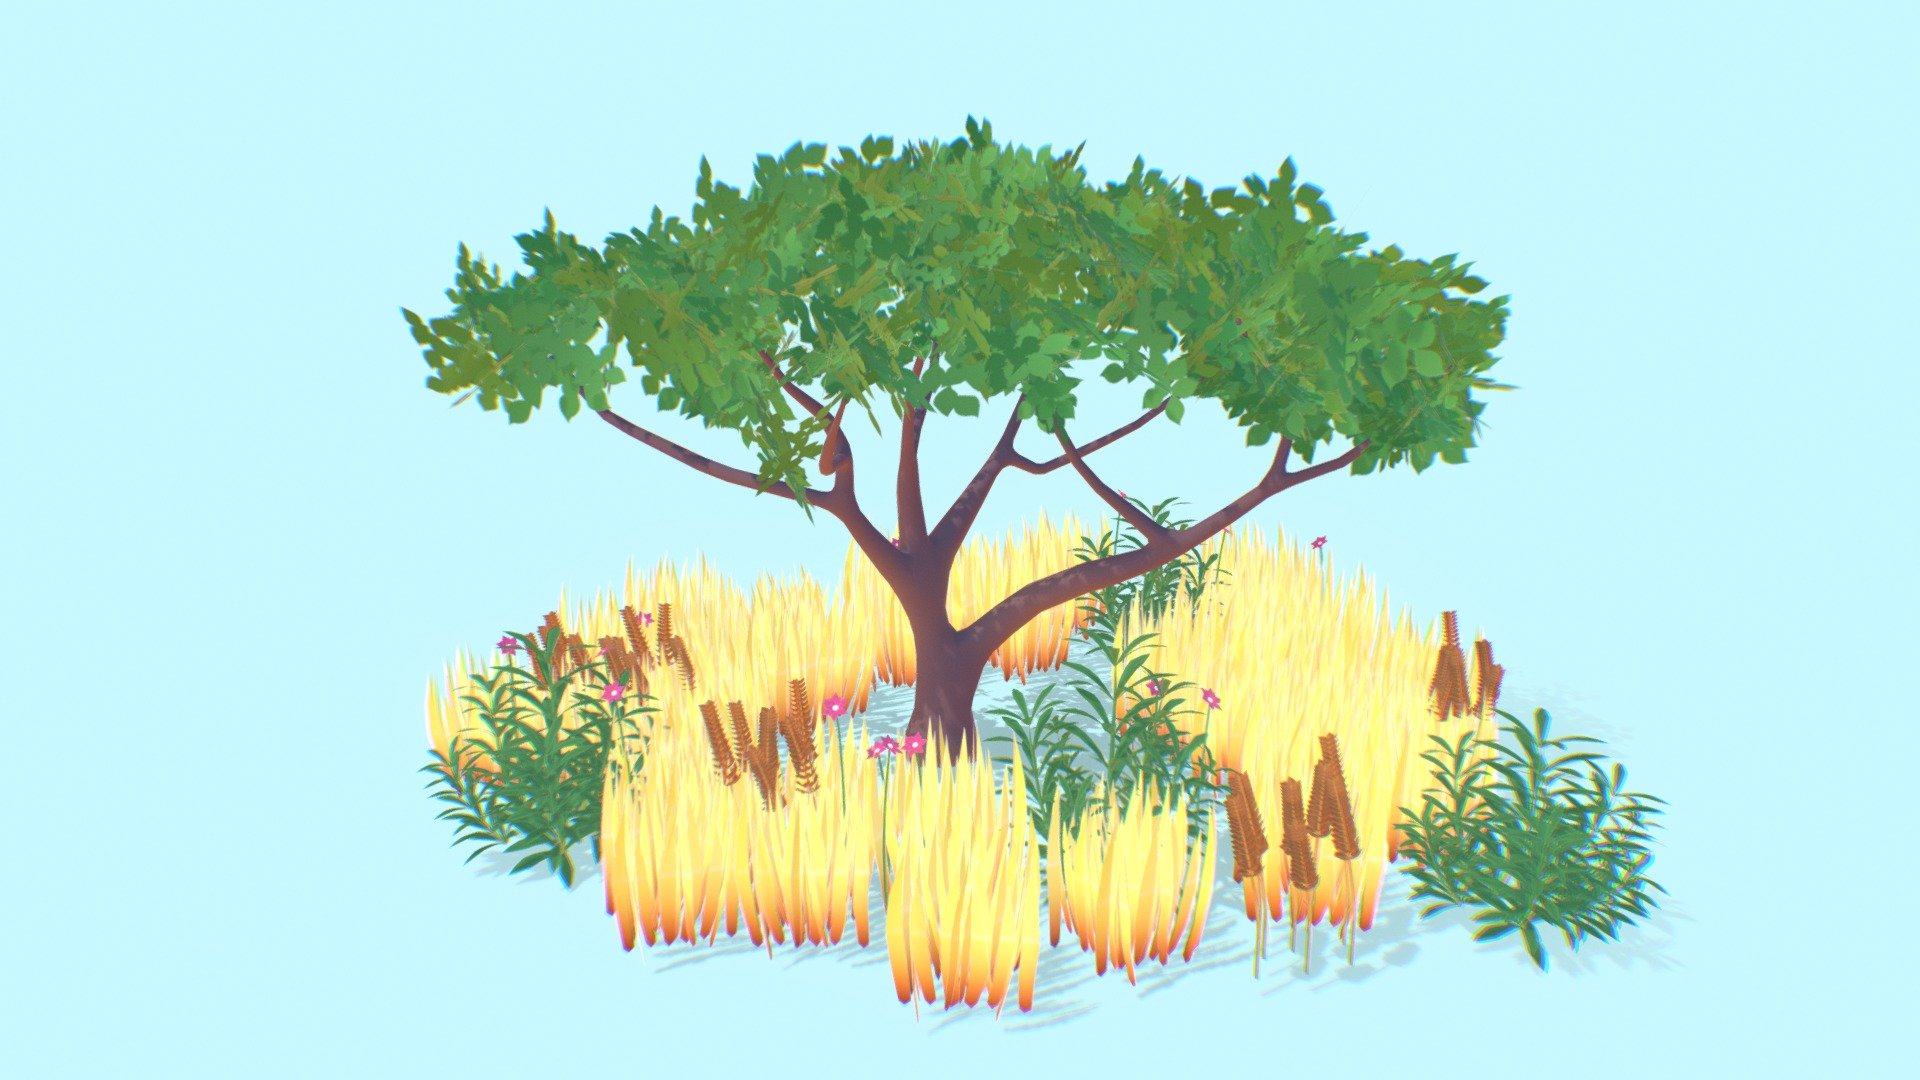 This is a kit of plants I made for a scene I'm working on. It is low poly, hand painted&hellip; very stylized and simple 3d model